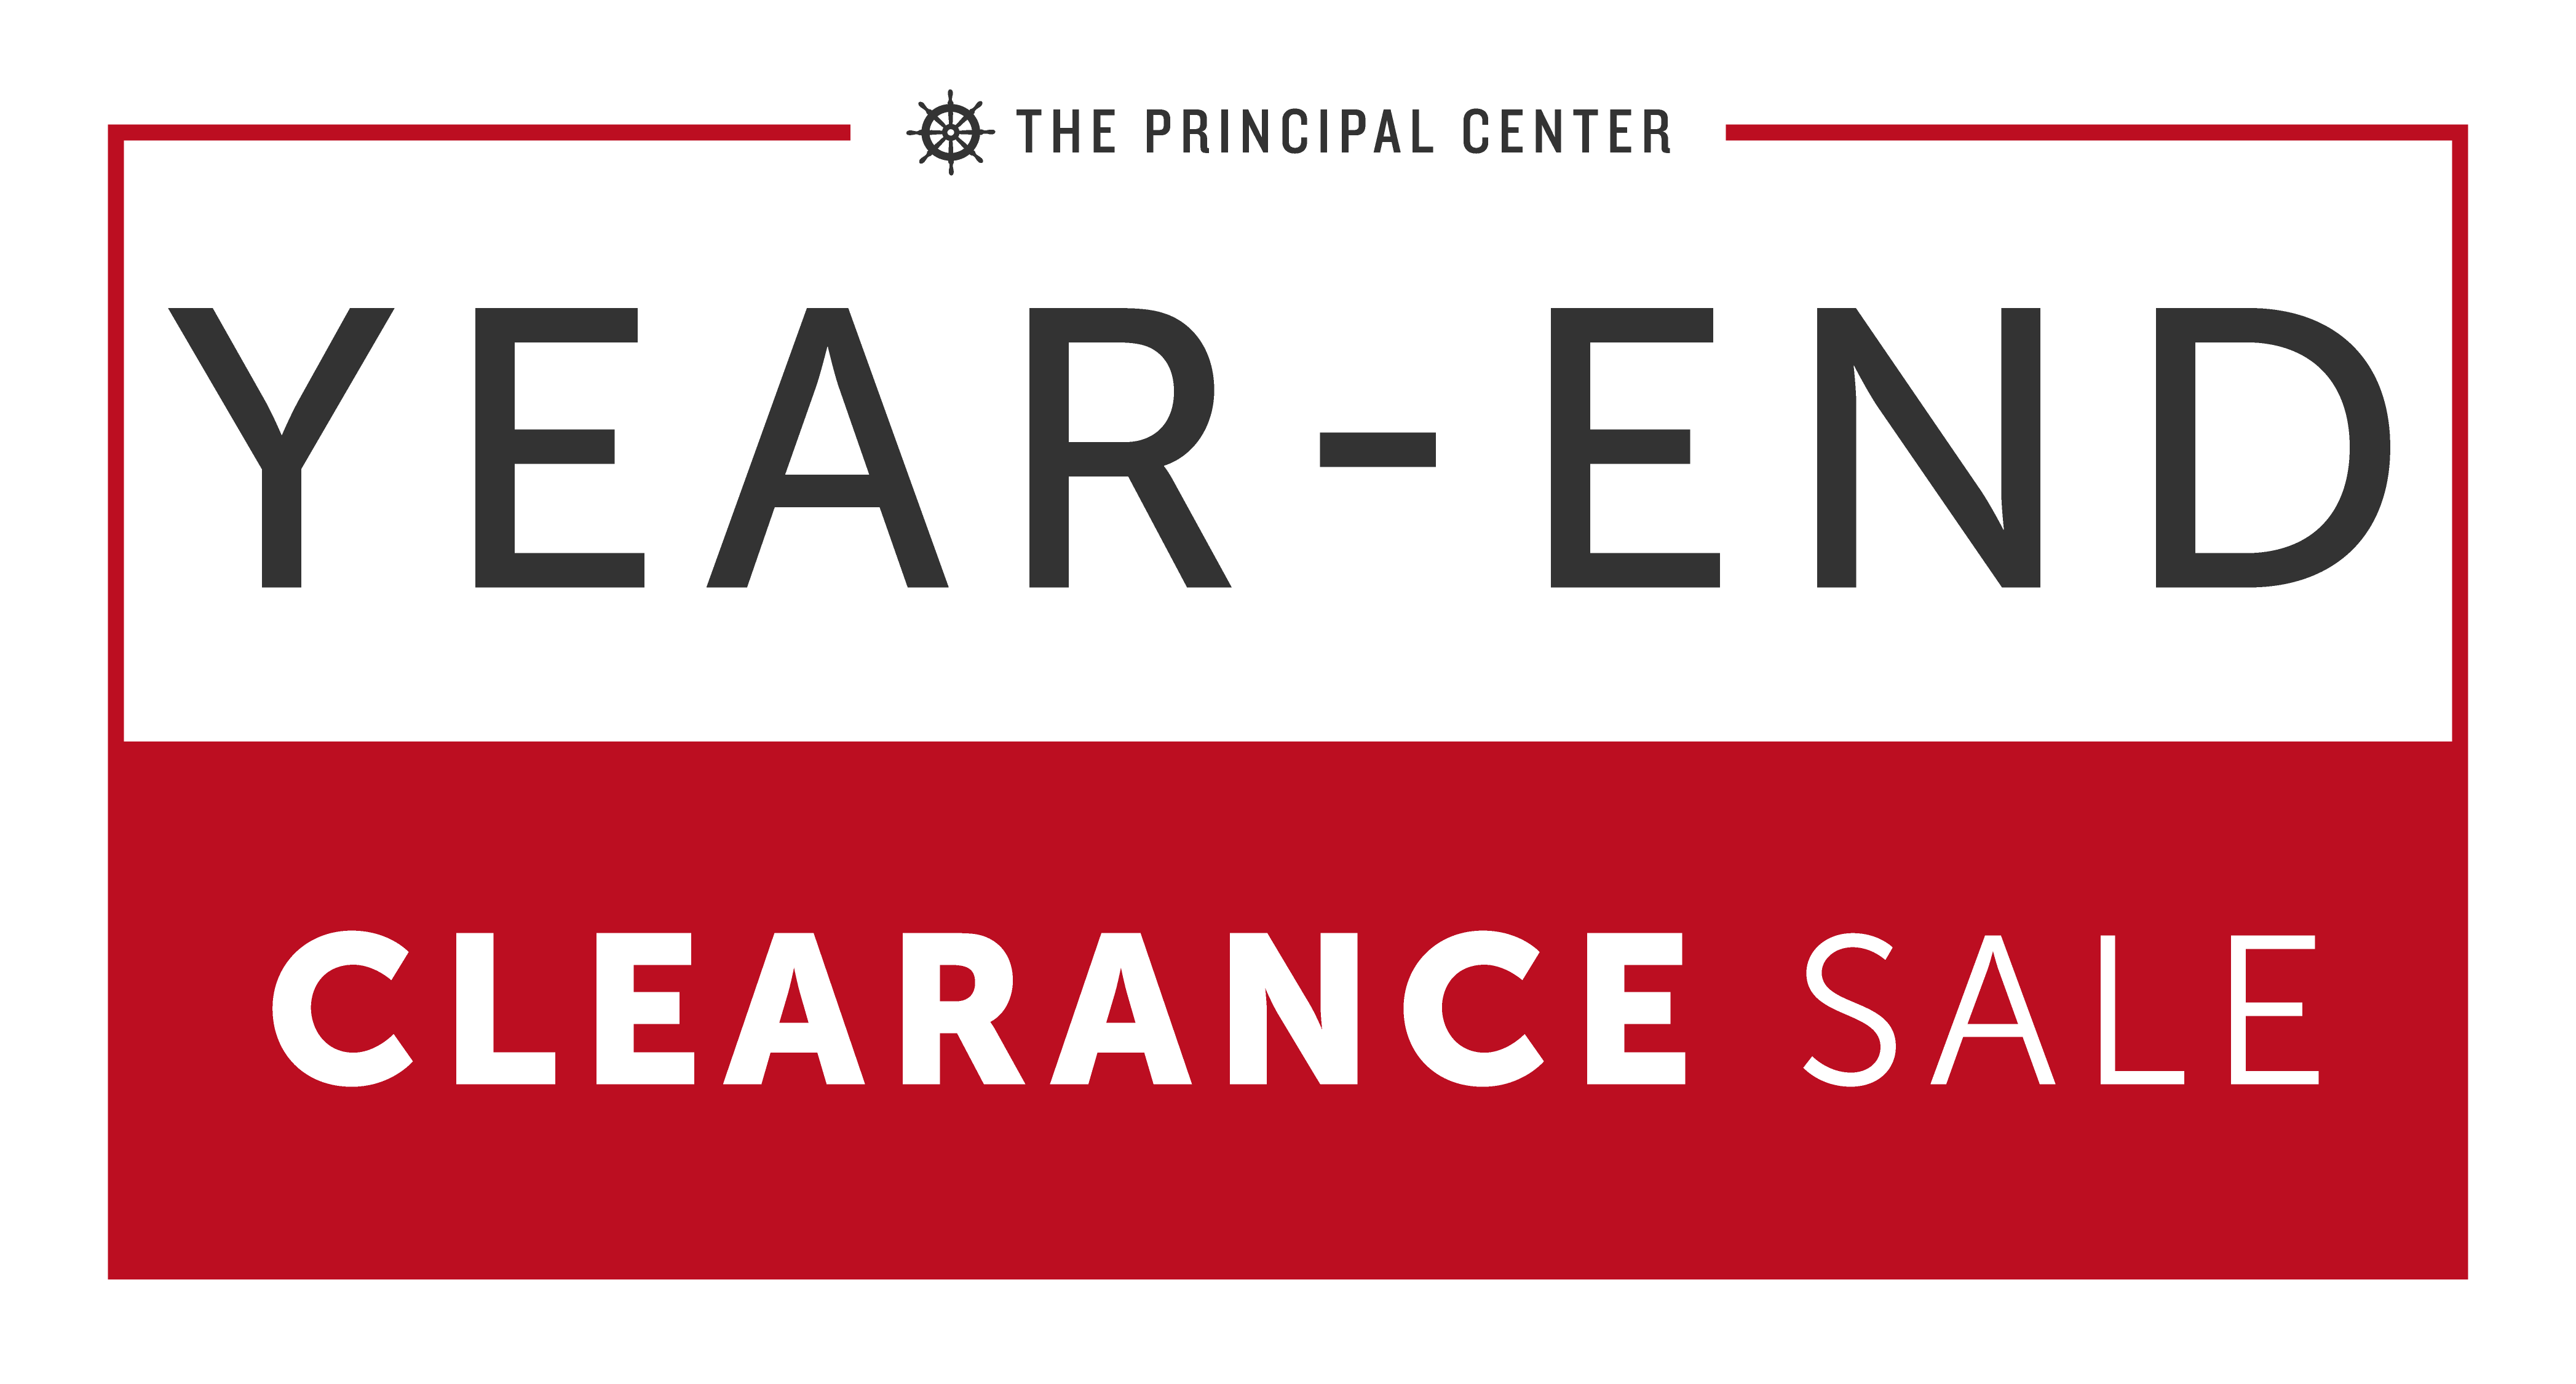 https://www.principalcenter.com/wp-content/uploads/2021-Year-End-Clearance-Sale-01.png